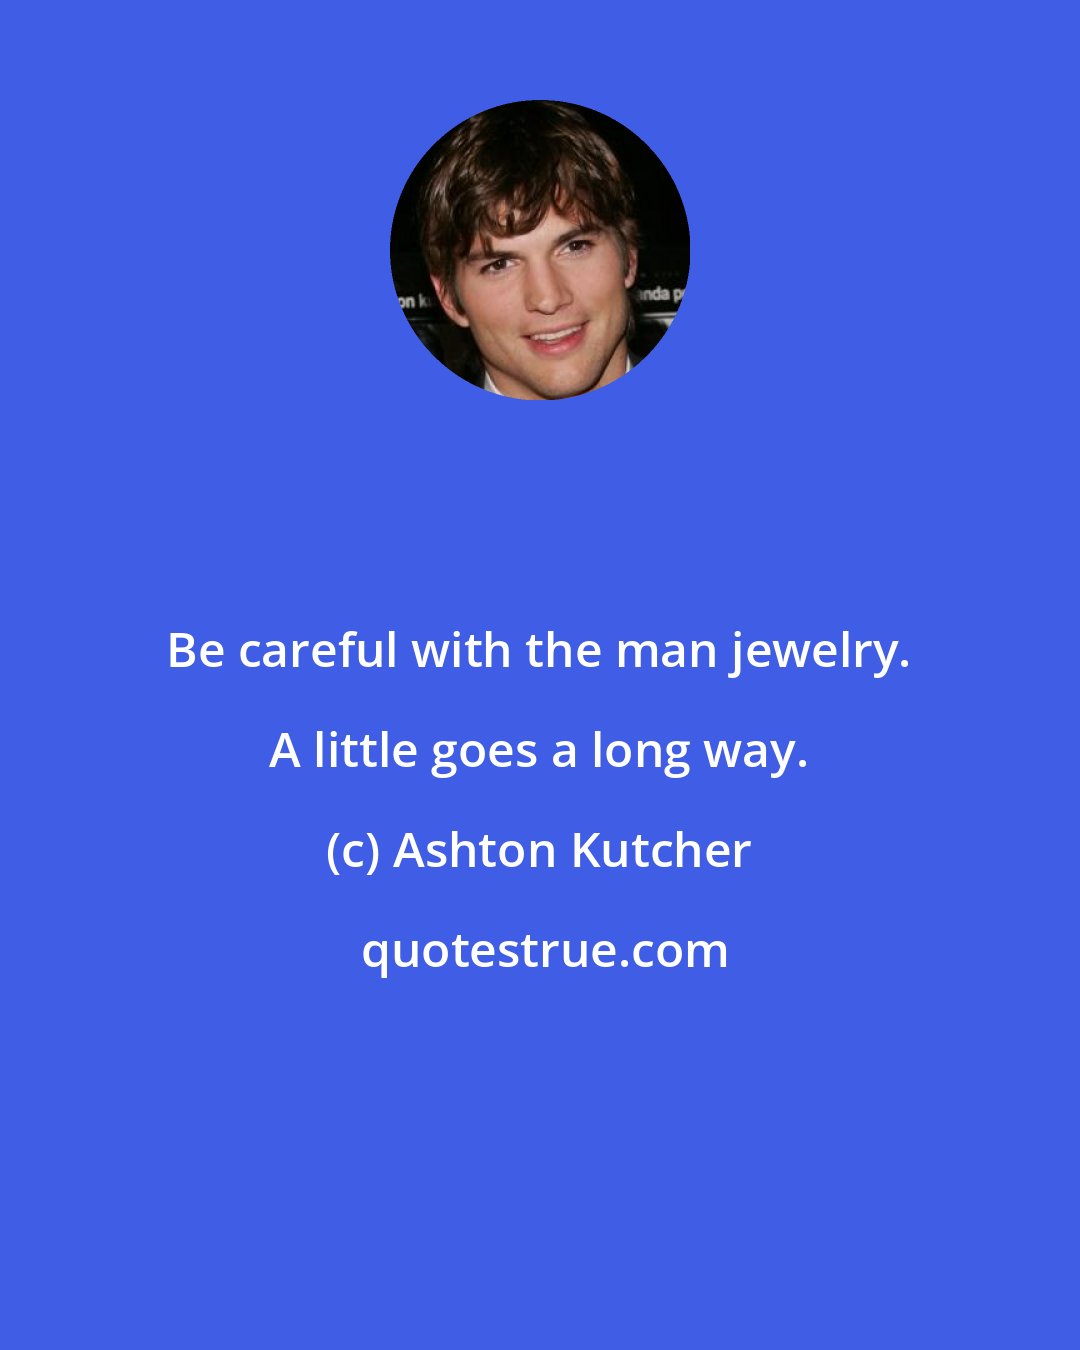 Ashton Kutcher: Be careful with the man jewelry. A little goes a long way.